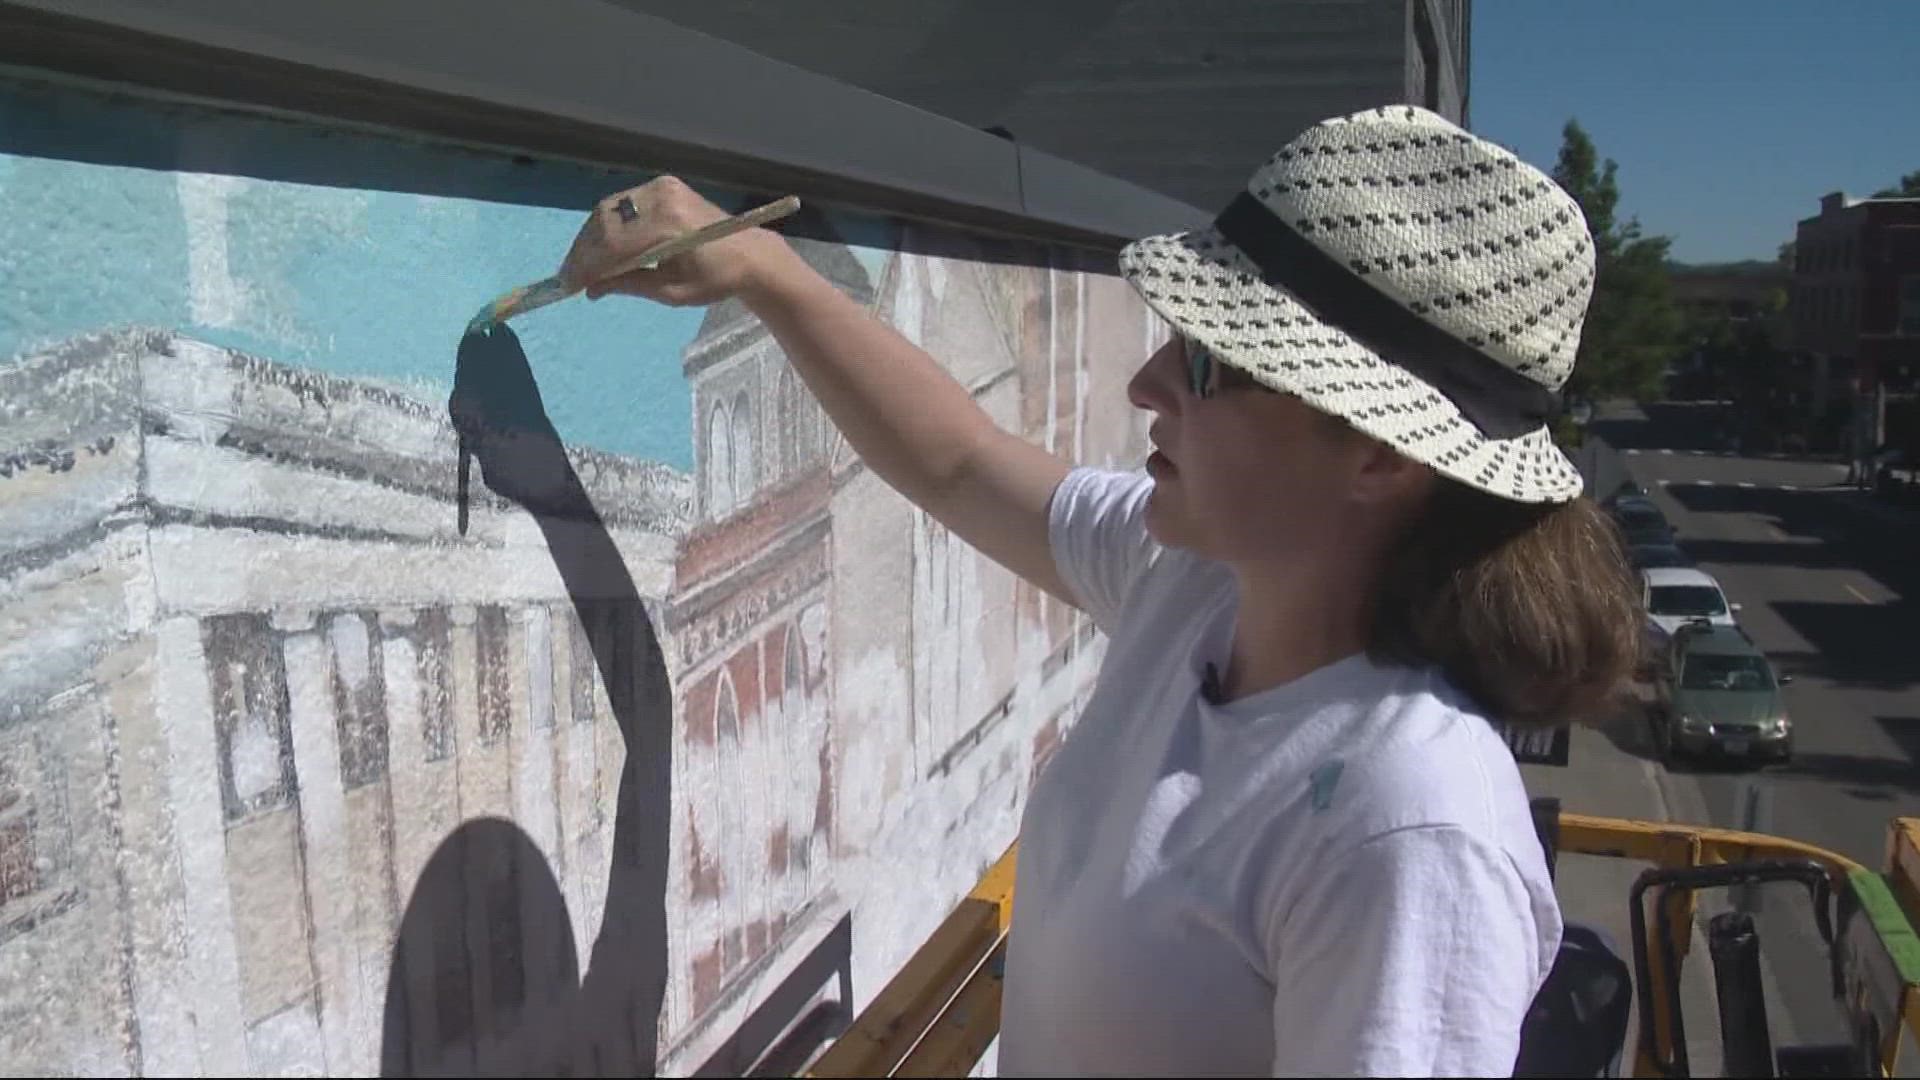 An artist in Oregon City is adding new life to old murals in Oregon City — and also creating some new ones. KGW's Devon Haskins reports.